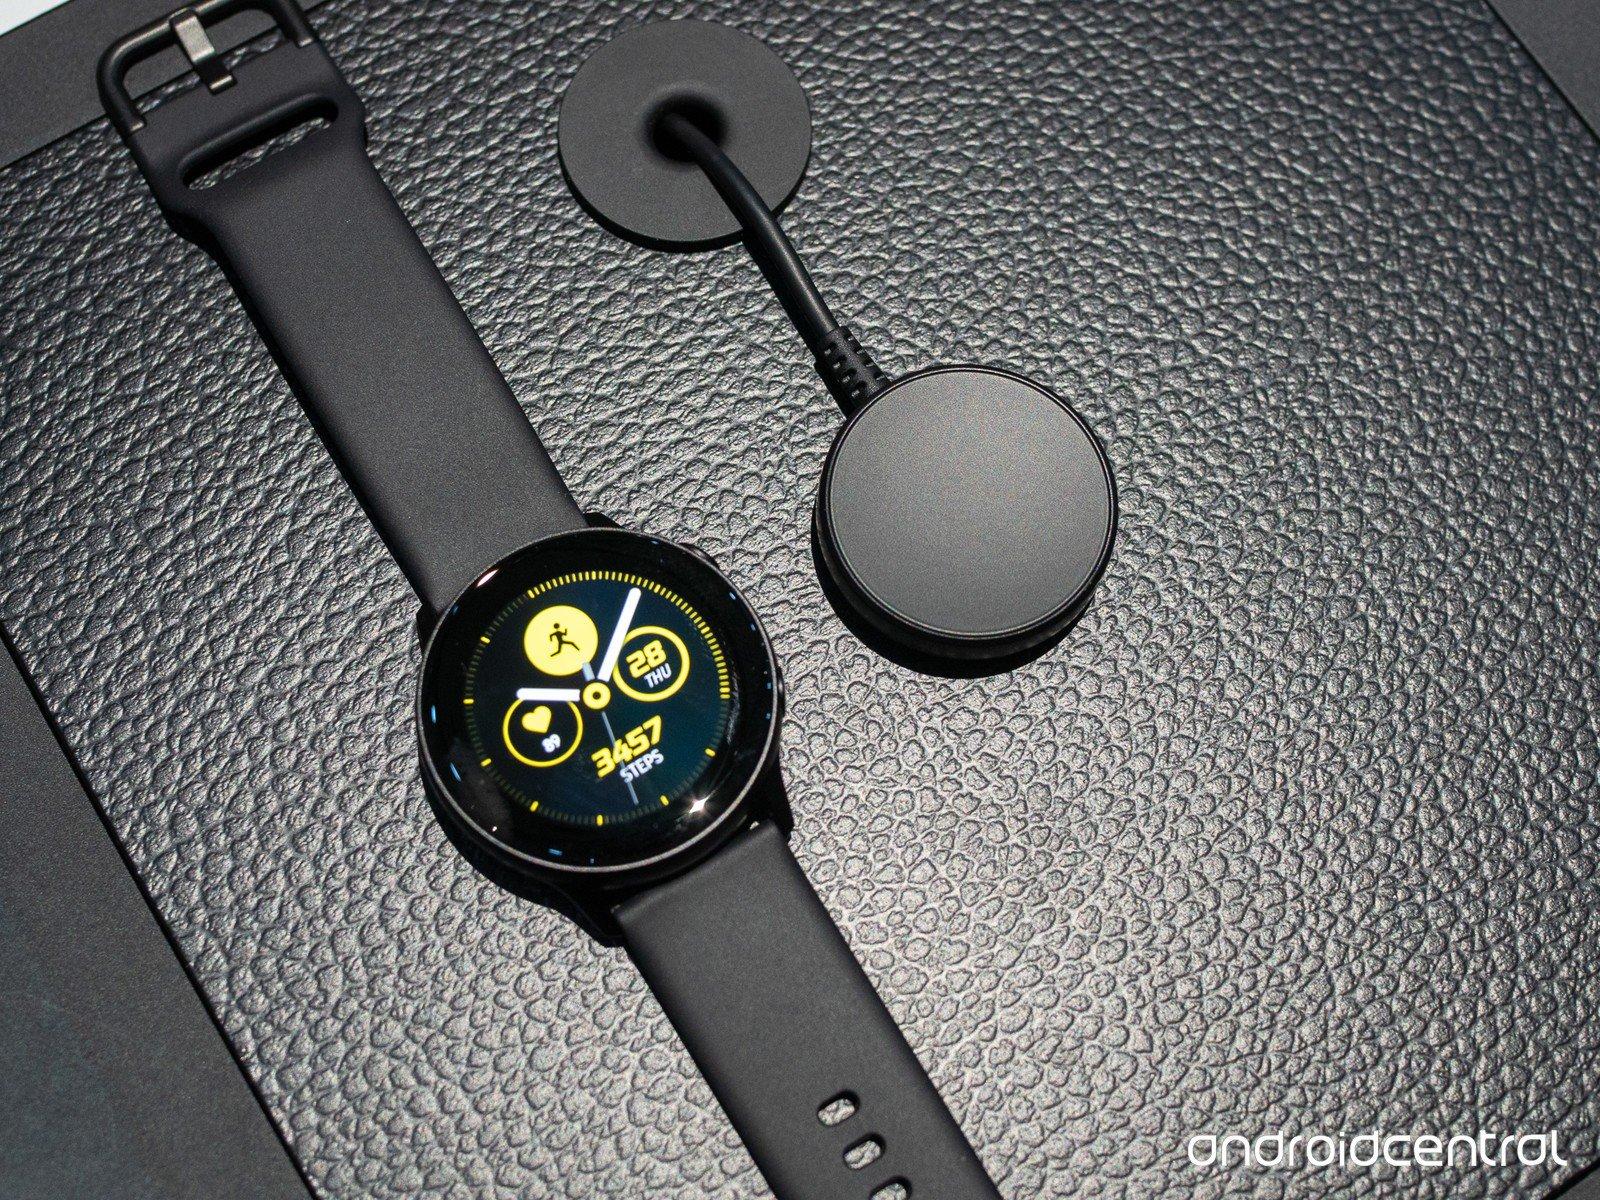 The Galaxy Watch Active could be one of 2019's best smartwatches